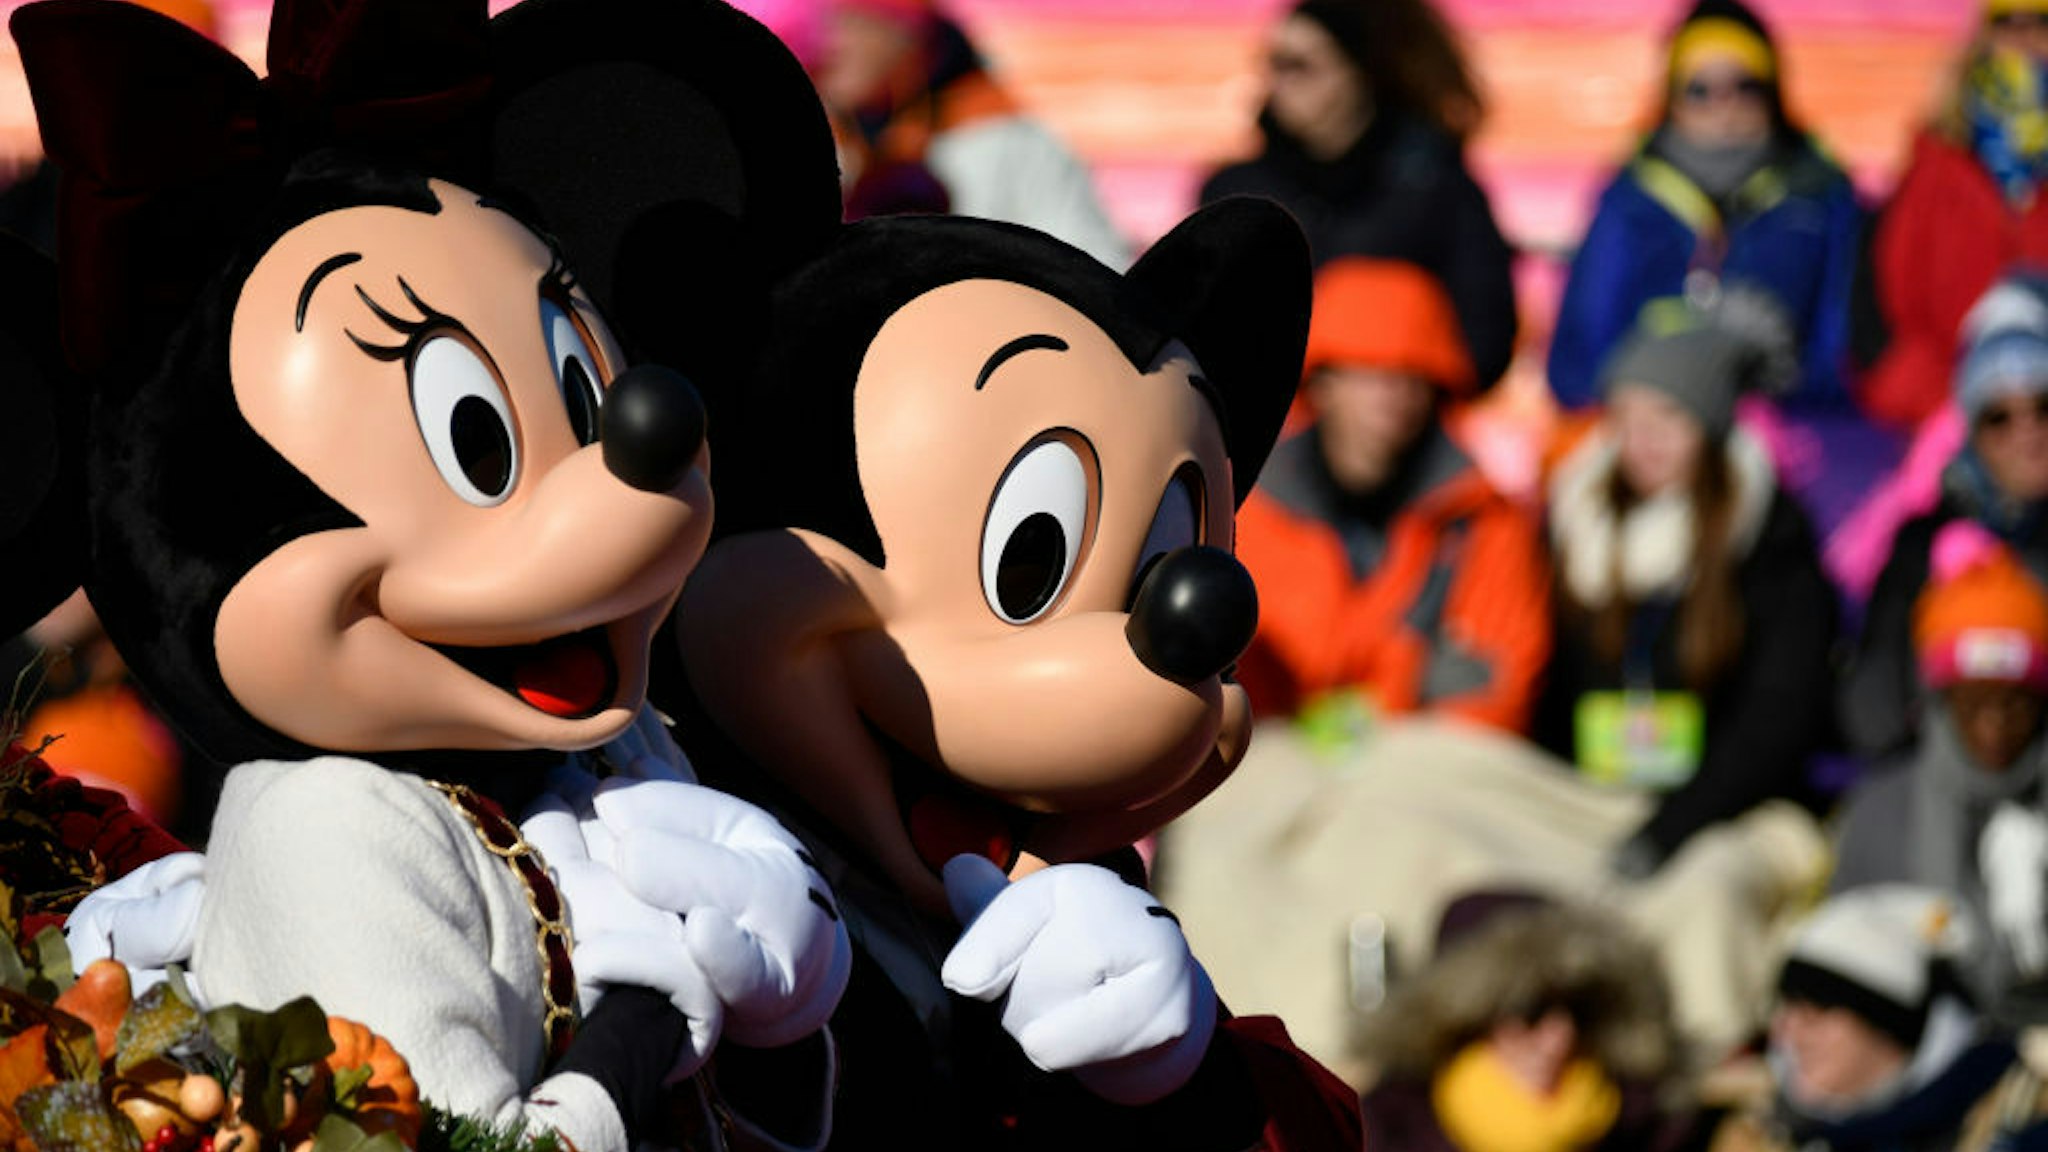 Disney's Mini and Mickey Mouse ride on a Walt Disney World carriage during the 99th 6ABC/Dunkin' Donuts Annual Thanksgiving Day parade, in Philadelphia, PA, on November 22, 2018. The annual parade on Benjamin Franklin Parkway is the oldest in the nation. (Photo by Bastiaan Slabbers/NurPhoto via Getty Images)